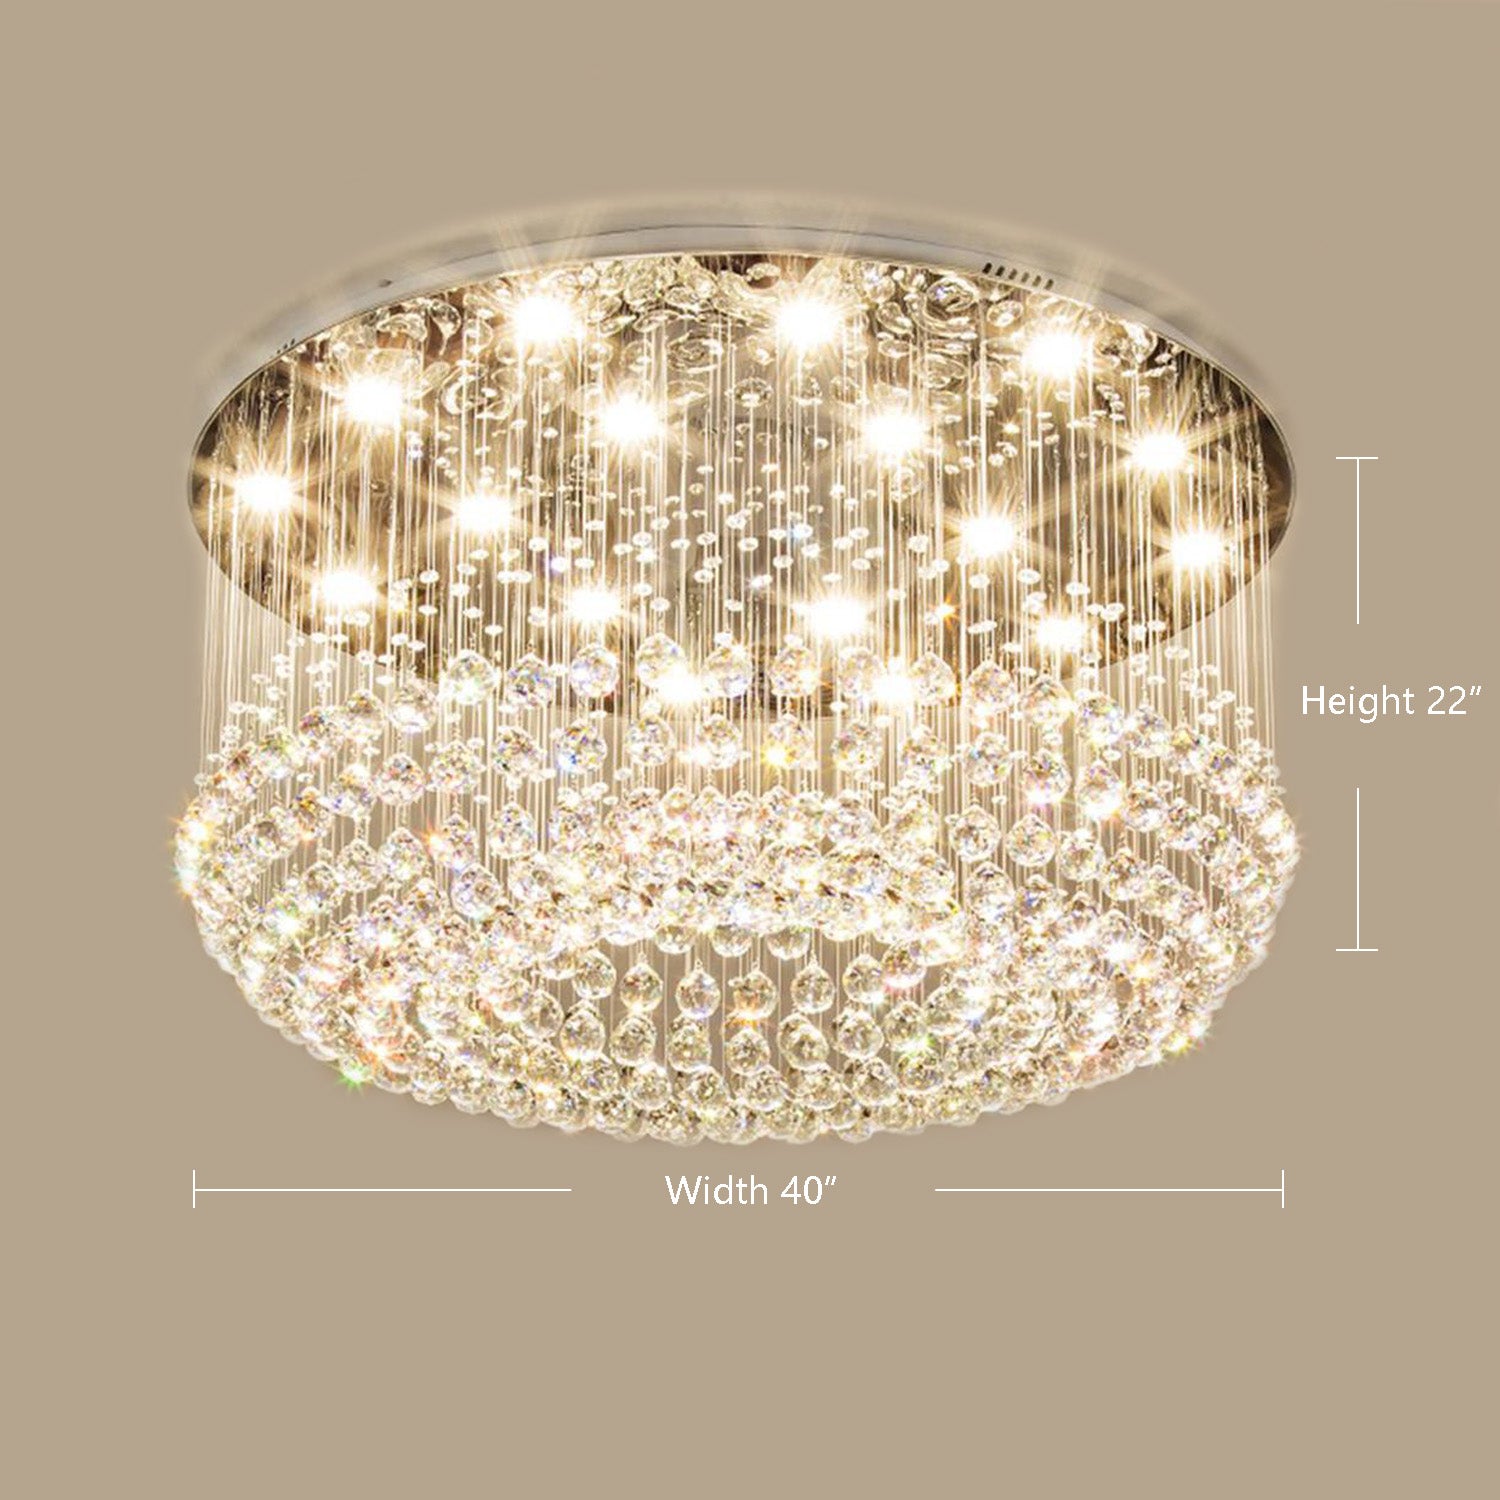 Petal Shape Raindrop Crystal Chandelier with Round Base - Side view